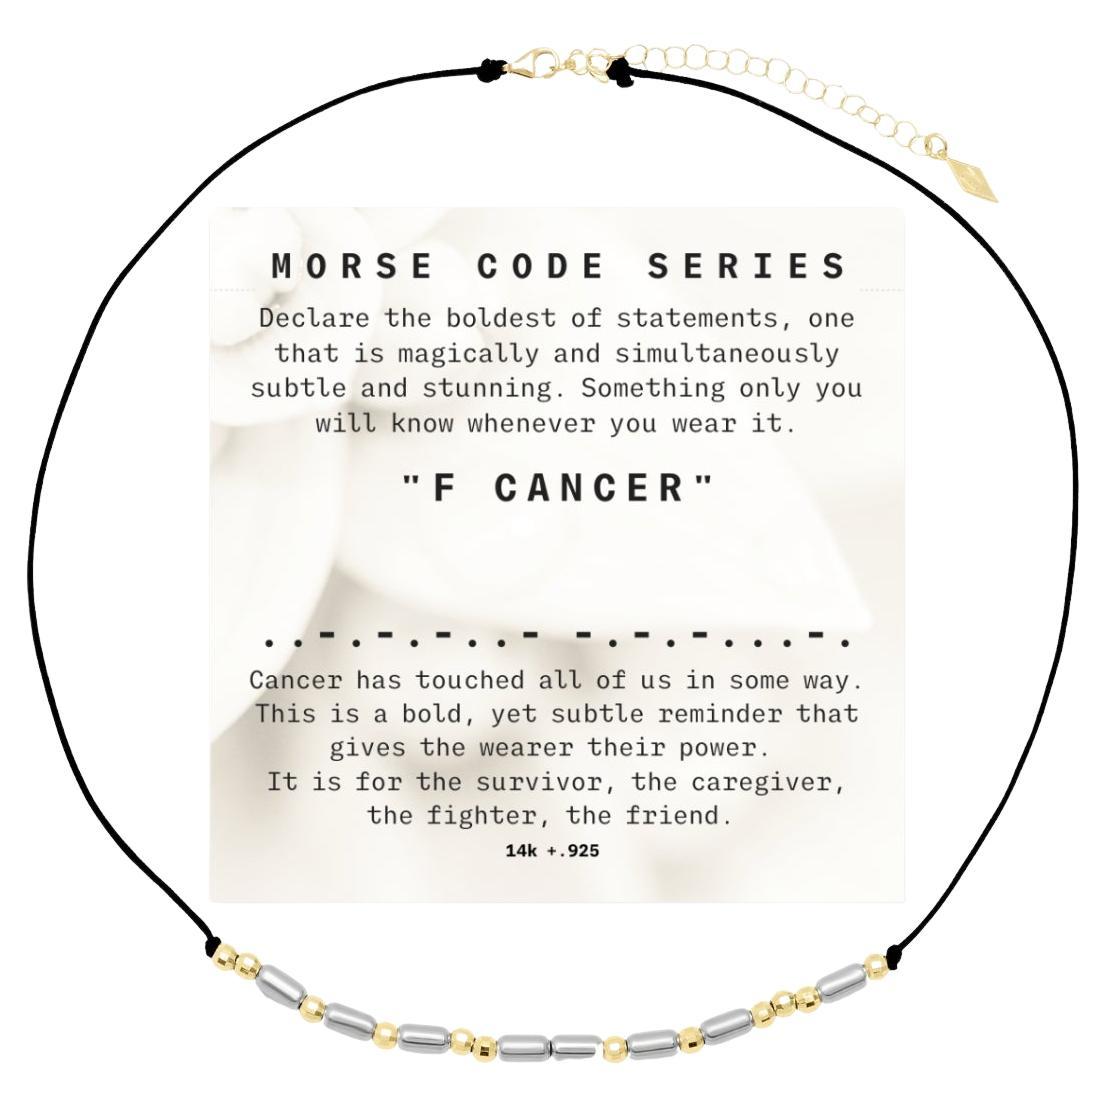 14K+.925 "Morse Code" Series F CANCER Choker/Necklace on Adjustable Macrame Cord